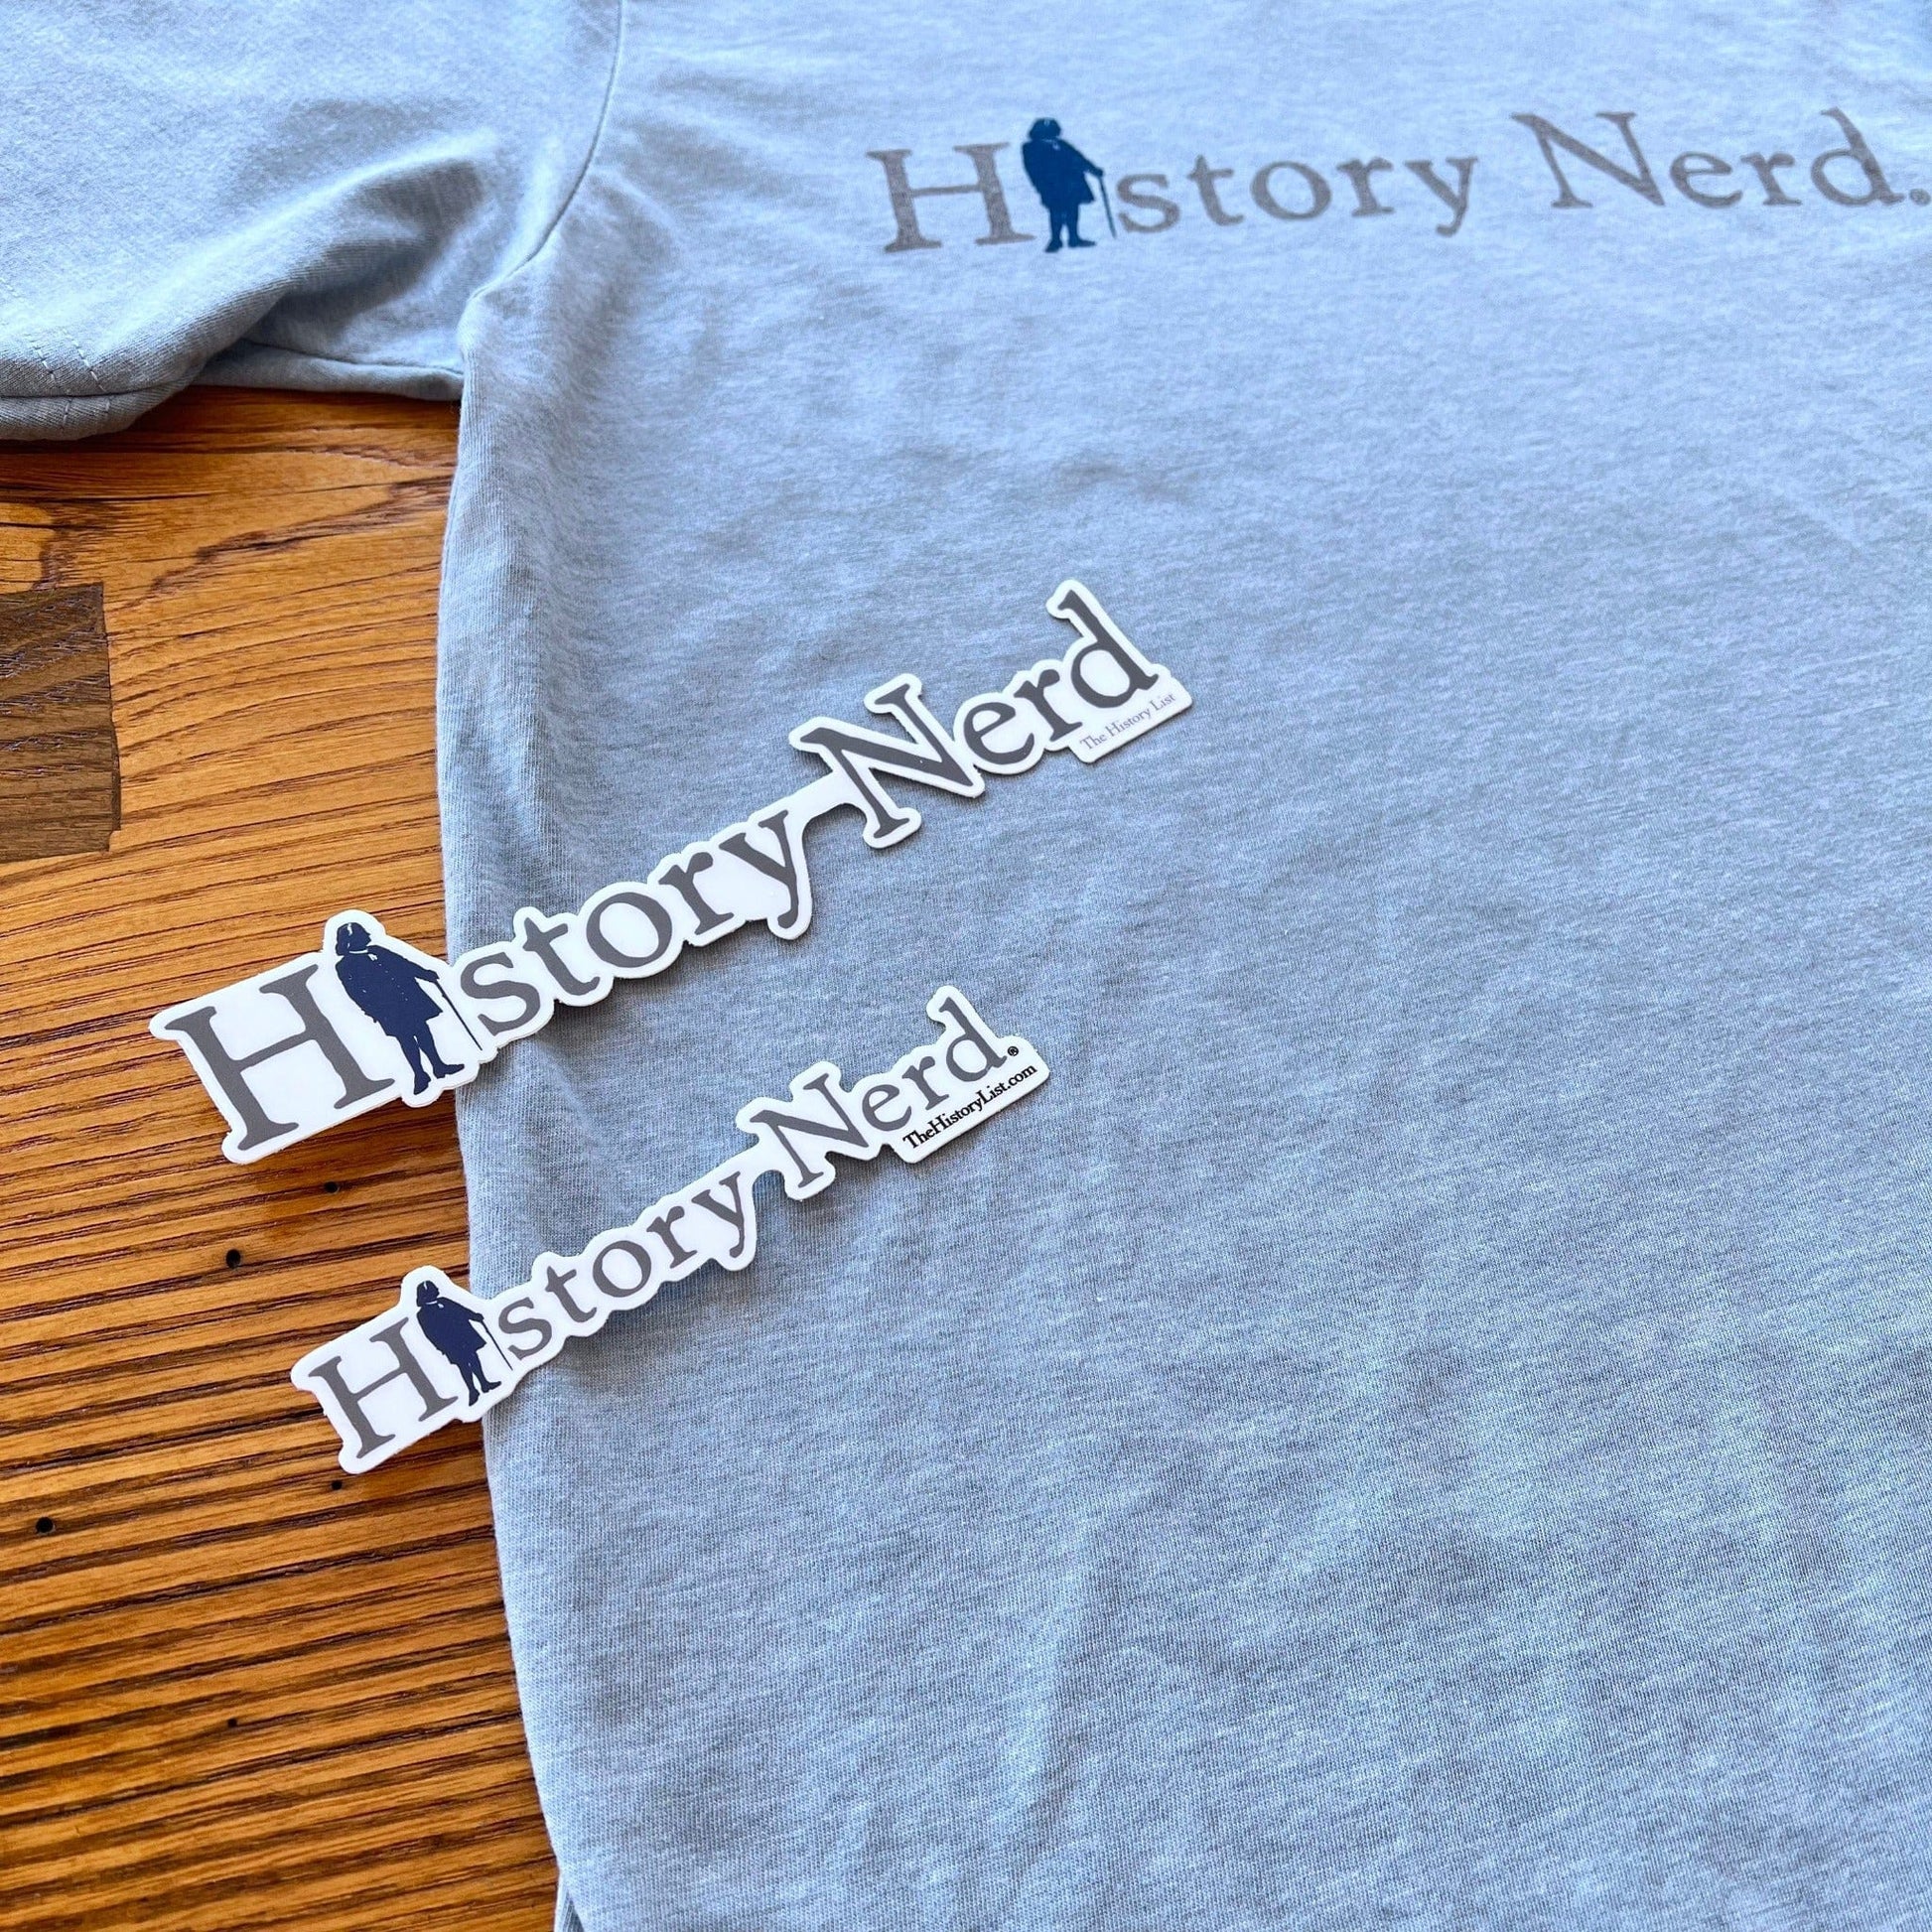 "History Nerd" shirt and sticker with Ben Franklin from The History List Store